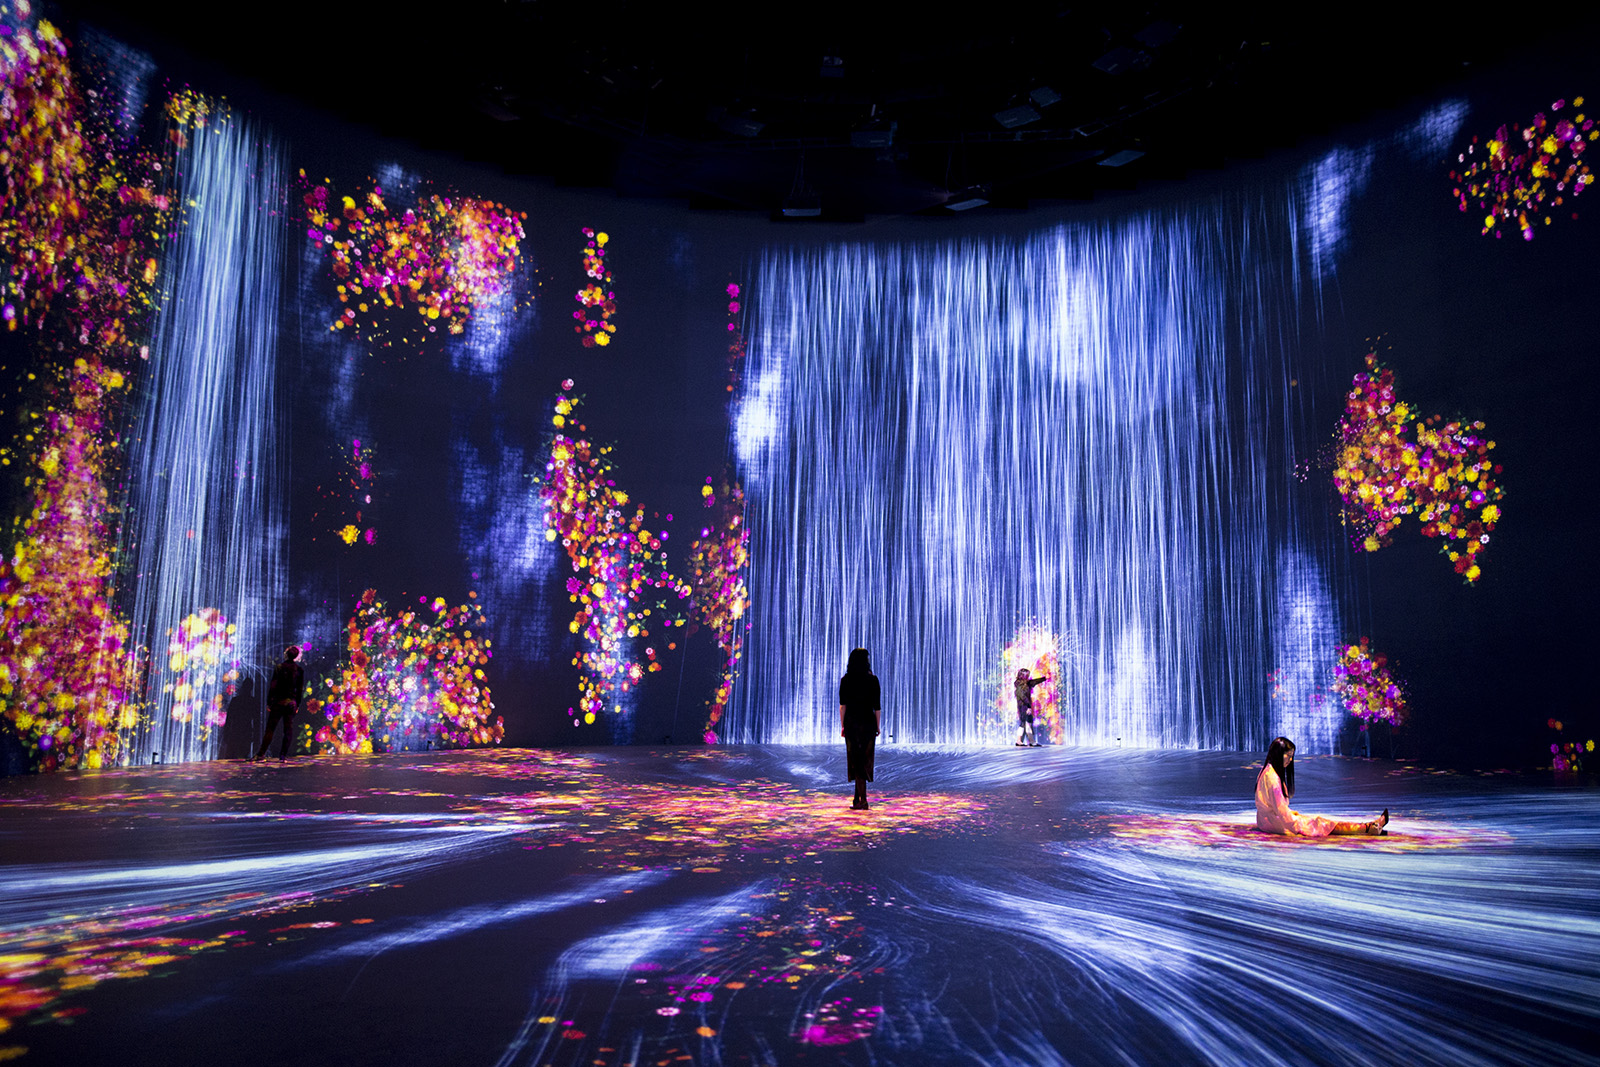 teamLab, Universe of Water Particles, Transcending Boundaries, and Flowers and People, Cannot be Controlled but Live Together -Transcending Boundaries, A Whole Year per Hour 2017. (Courtesy Pace Gallery)